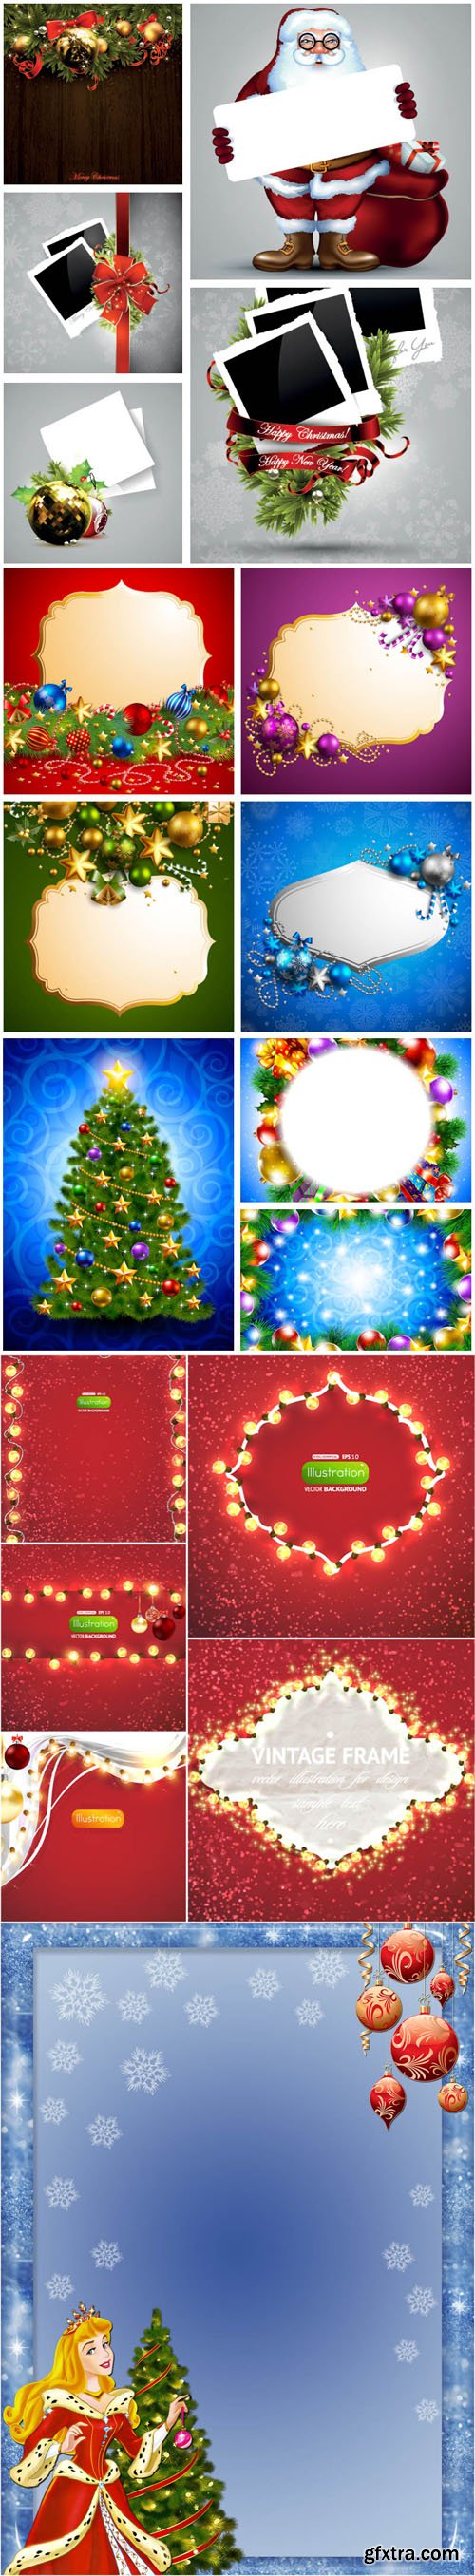 Christmas & New Year Backgrounds With Frames Templates in Vector